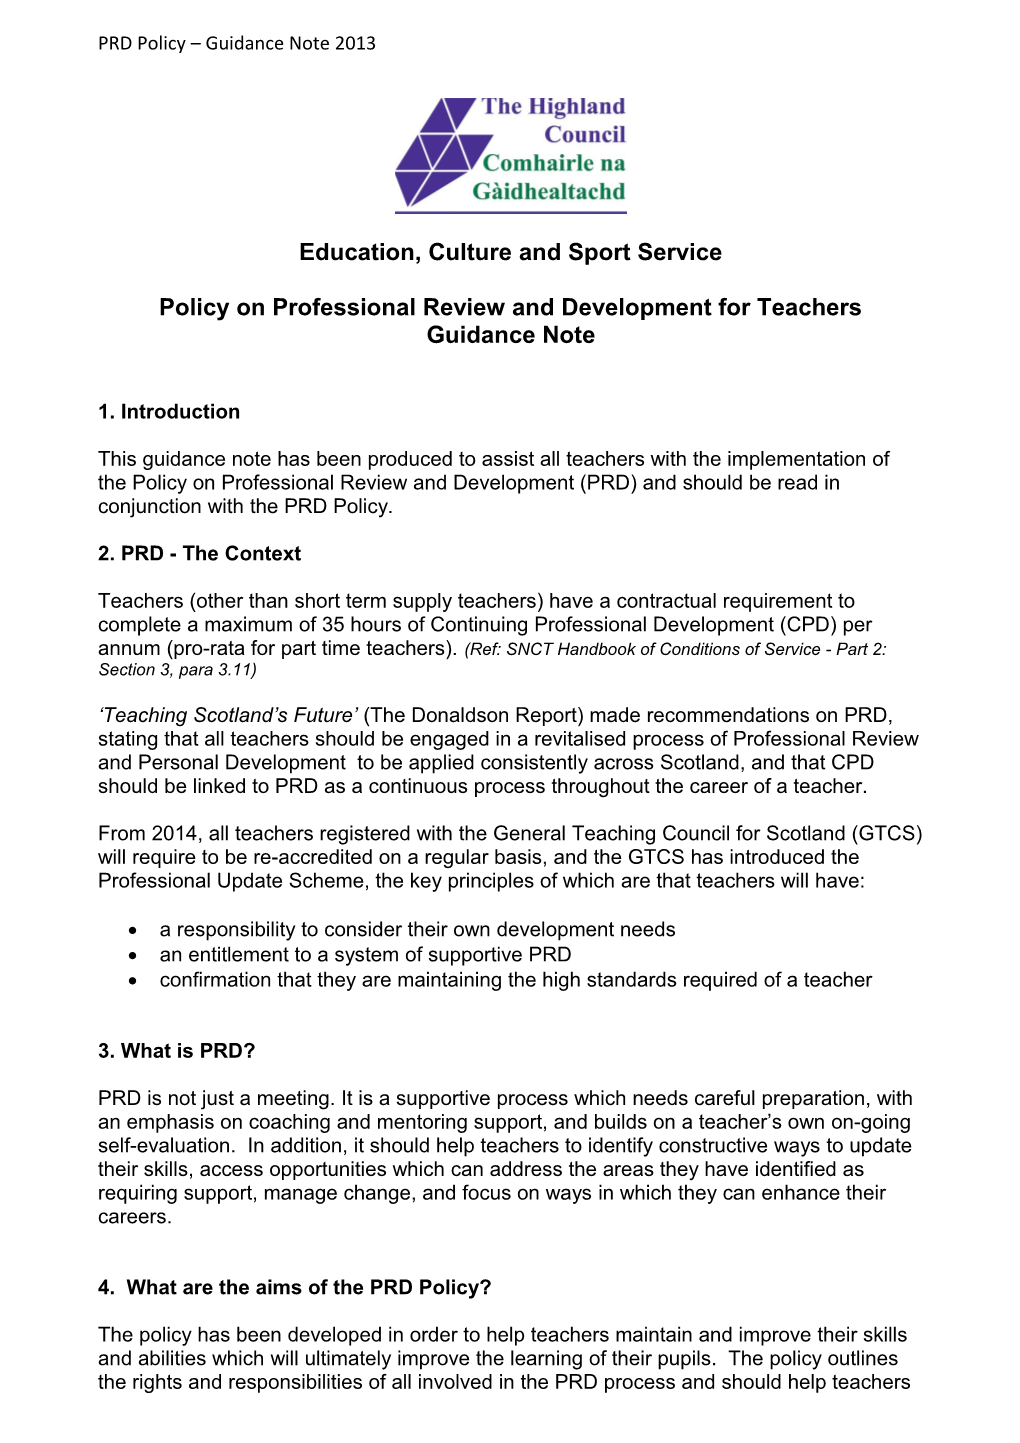 Policy on Professional Review and Development for Teachers